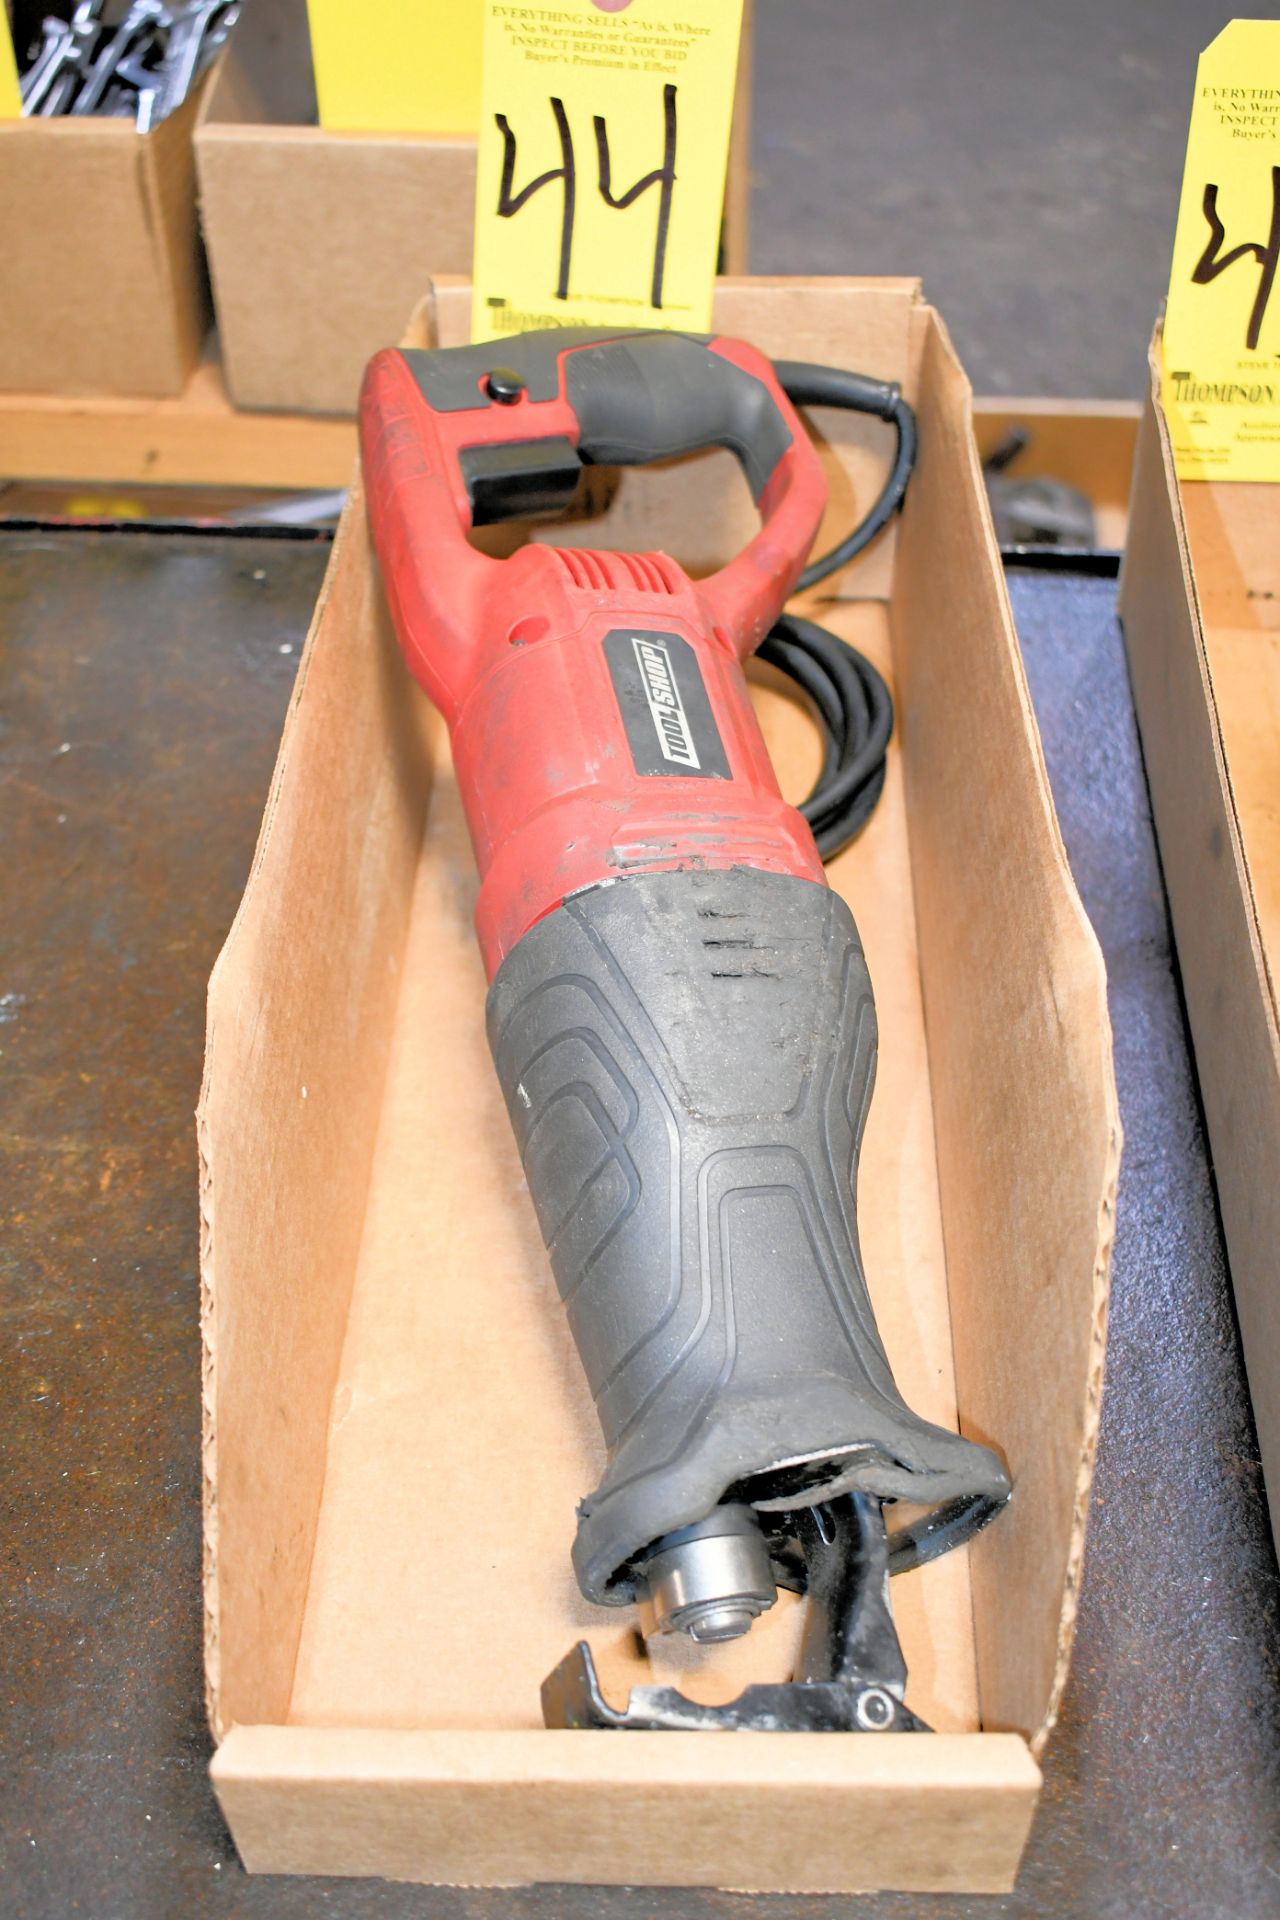 Tool Shop Electric Reciprocating Saw in (1) Box